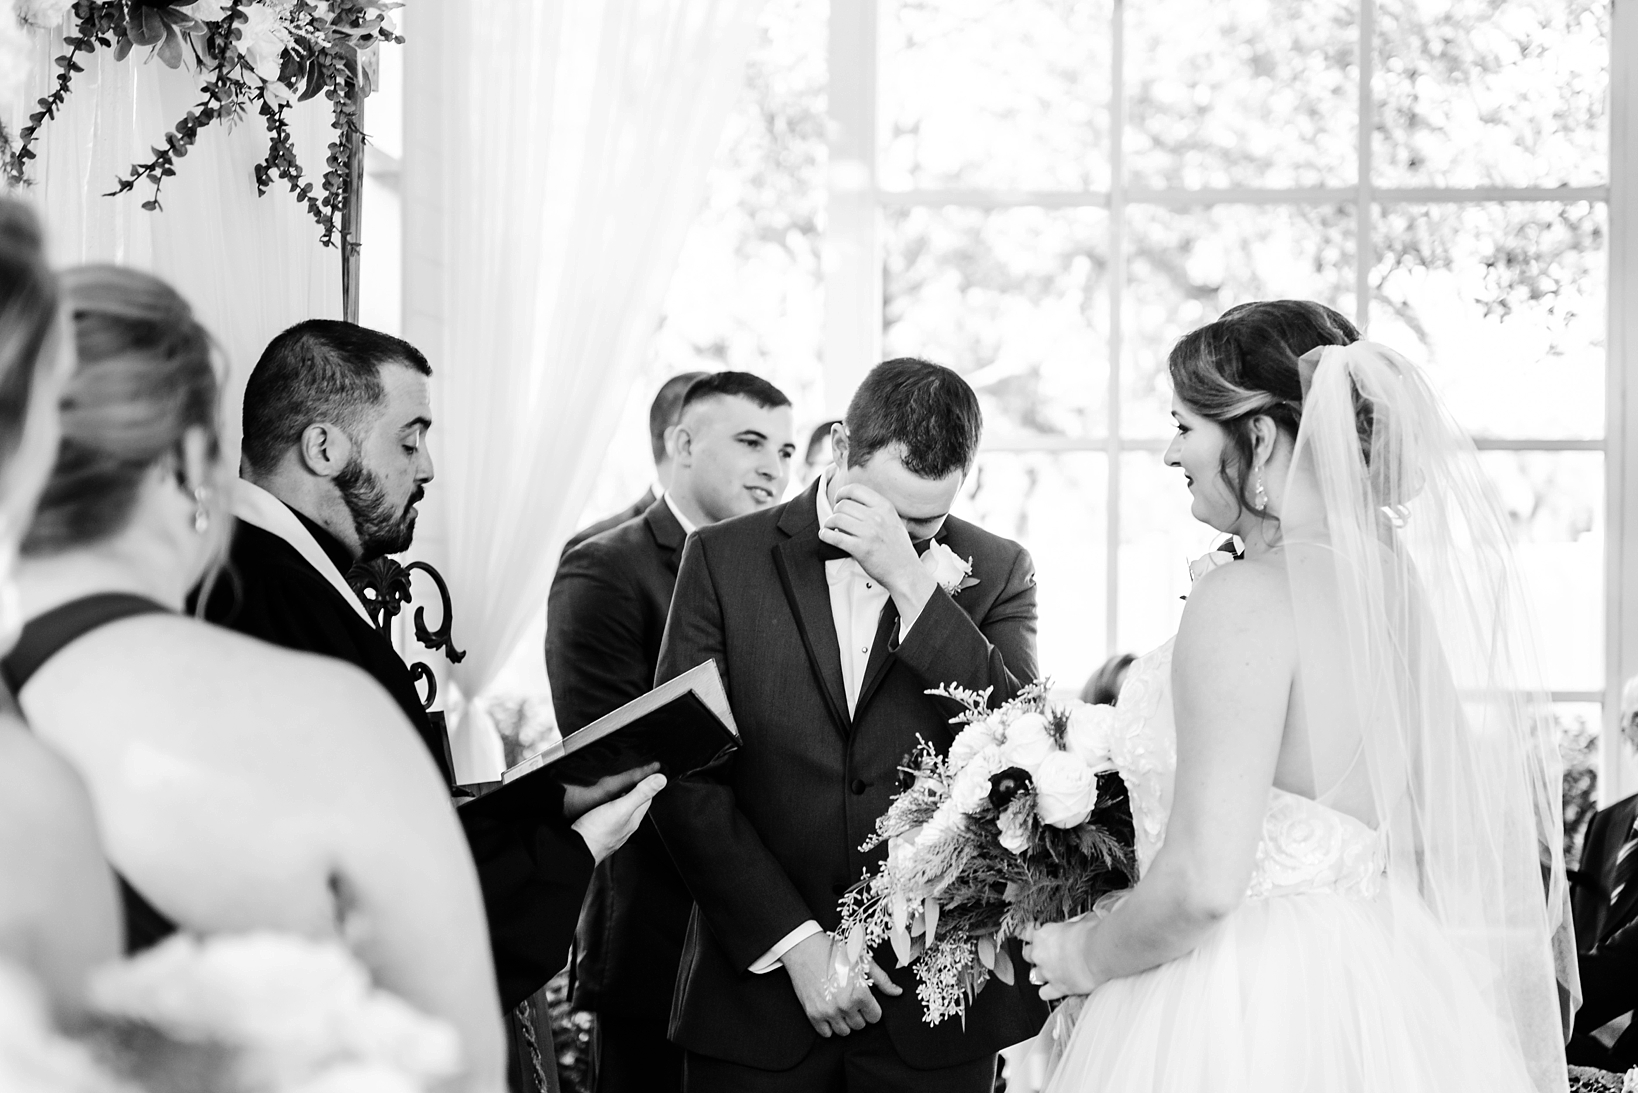 Groom wiping his tears away from his eyes during the wedding ceremony while seeing his bride for the first time